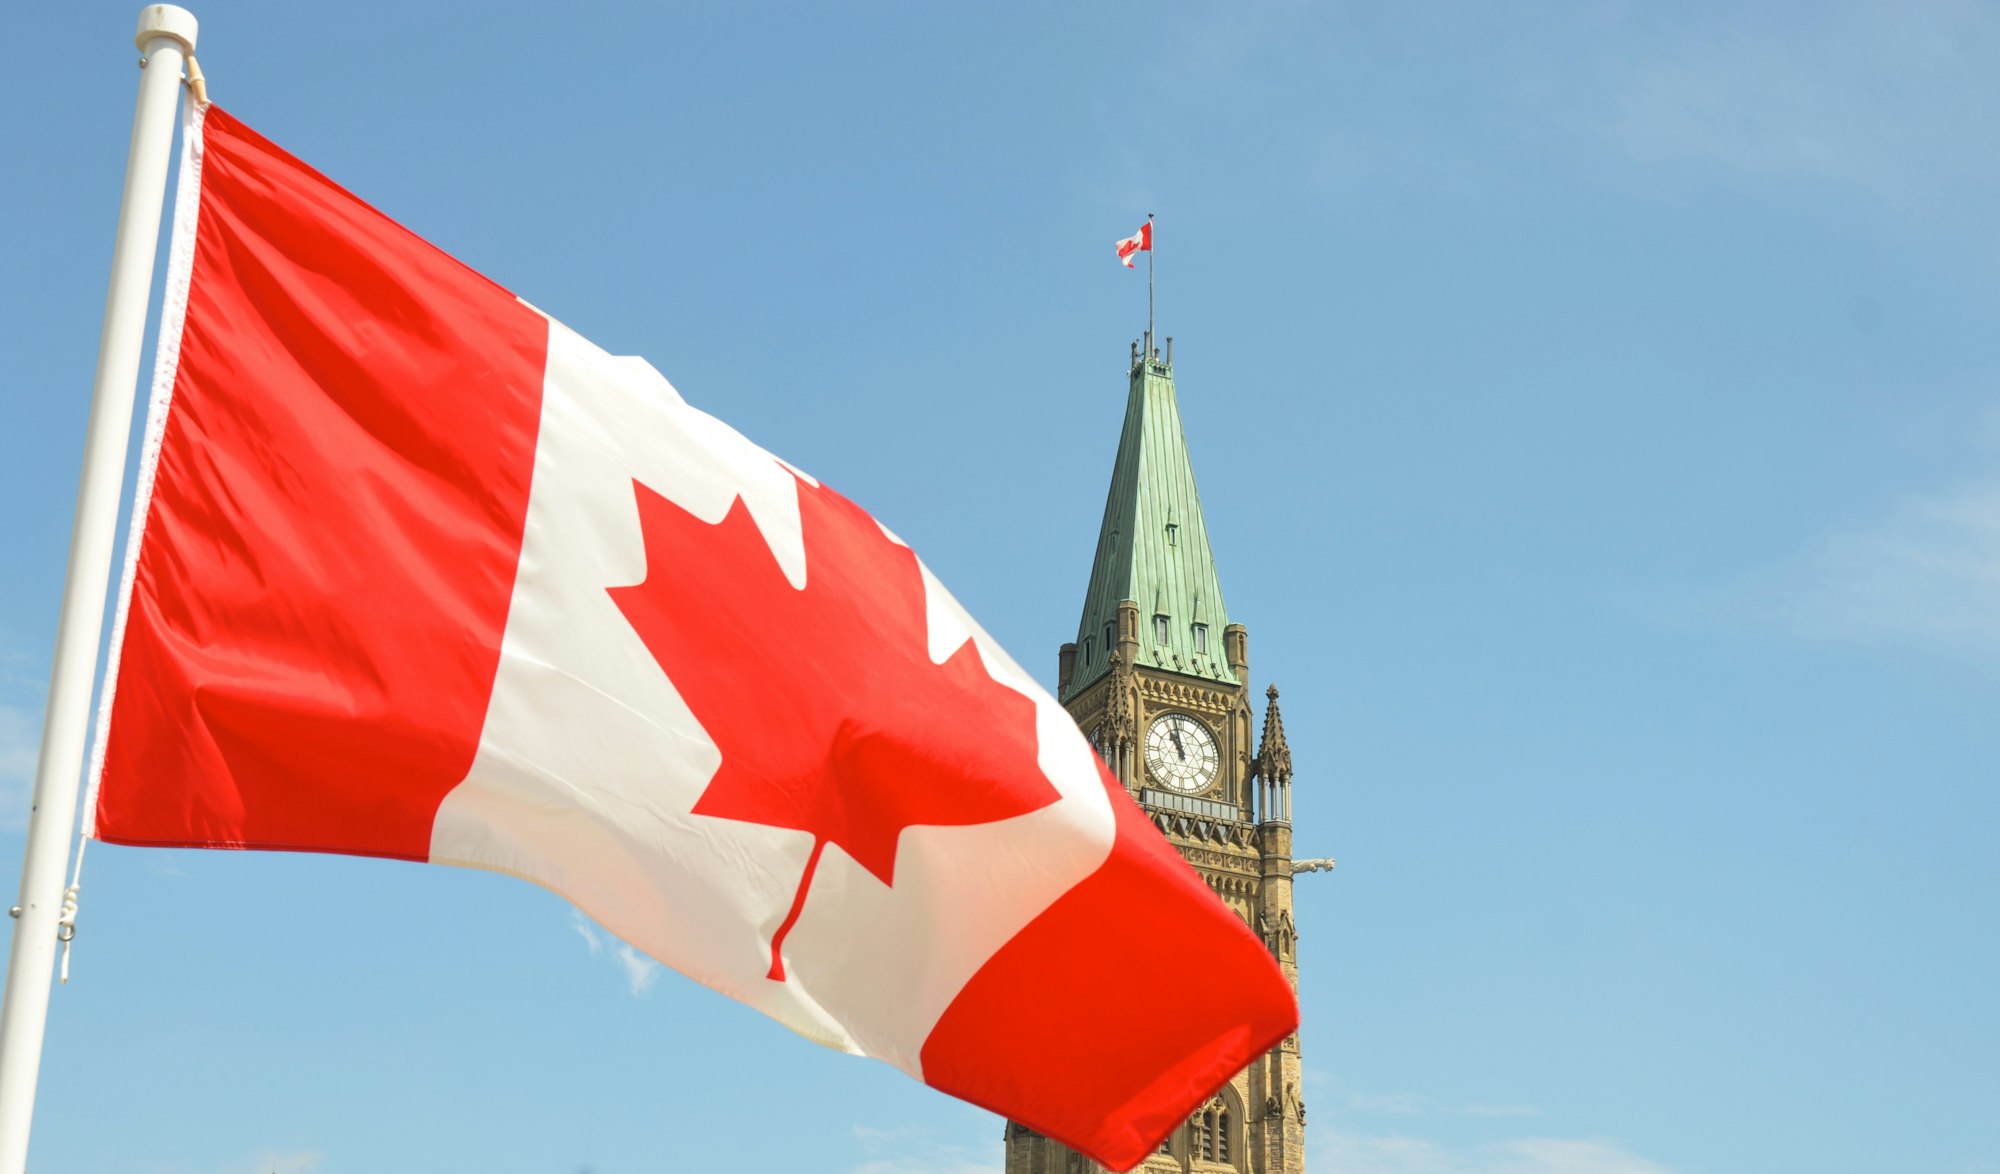 Binance is winding down operations in Canada